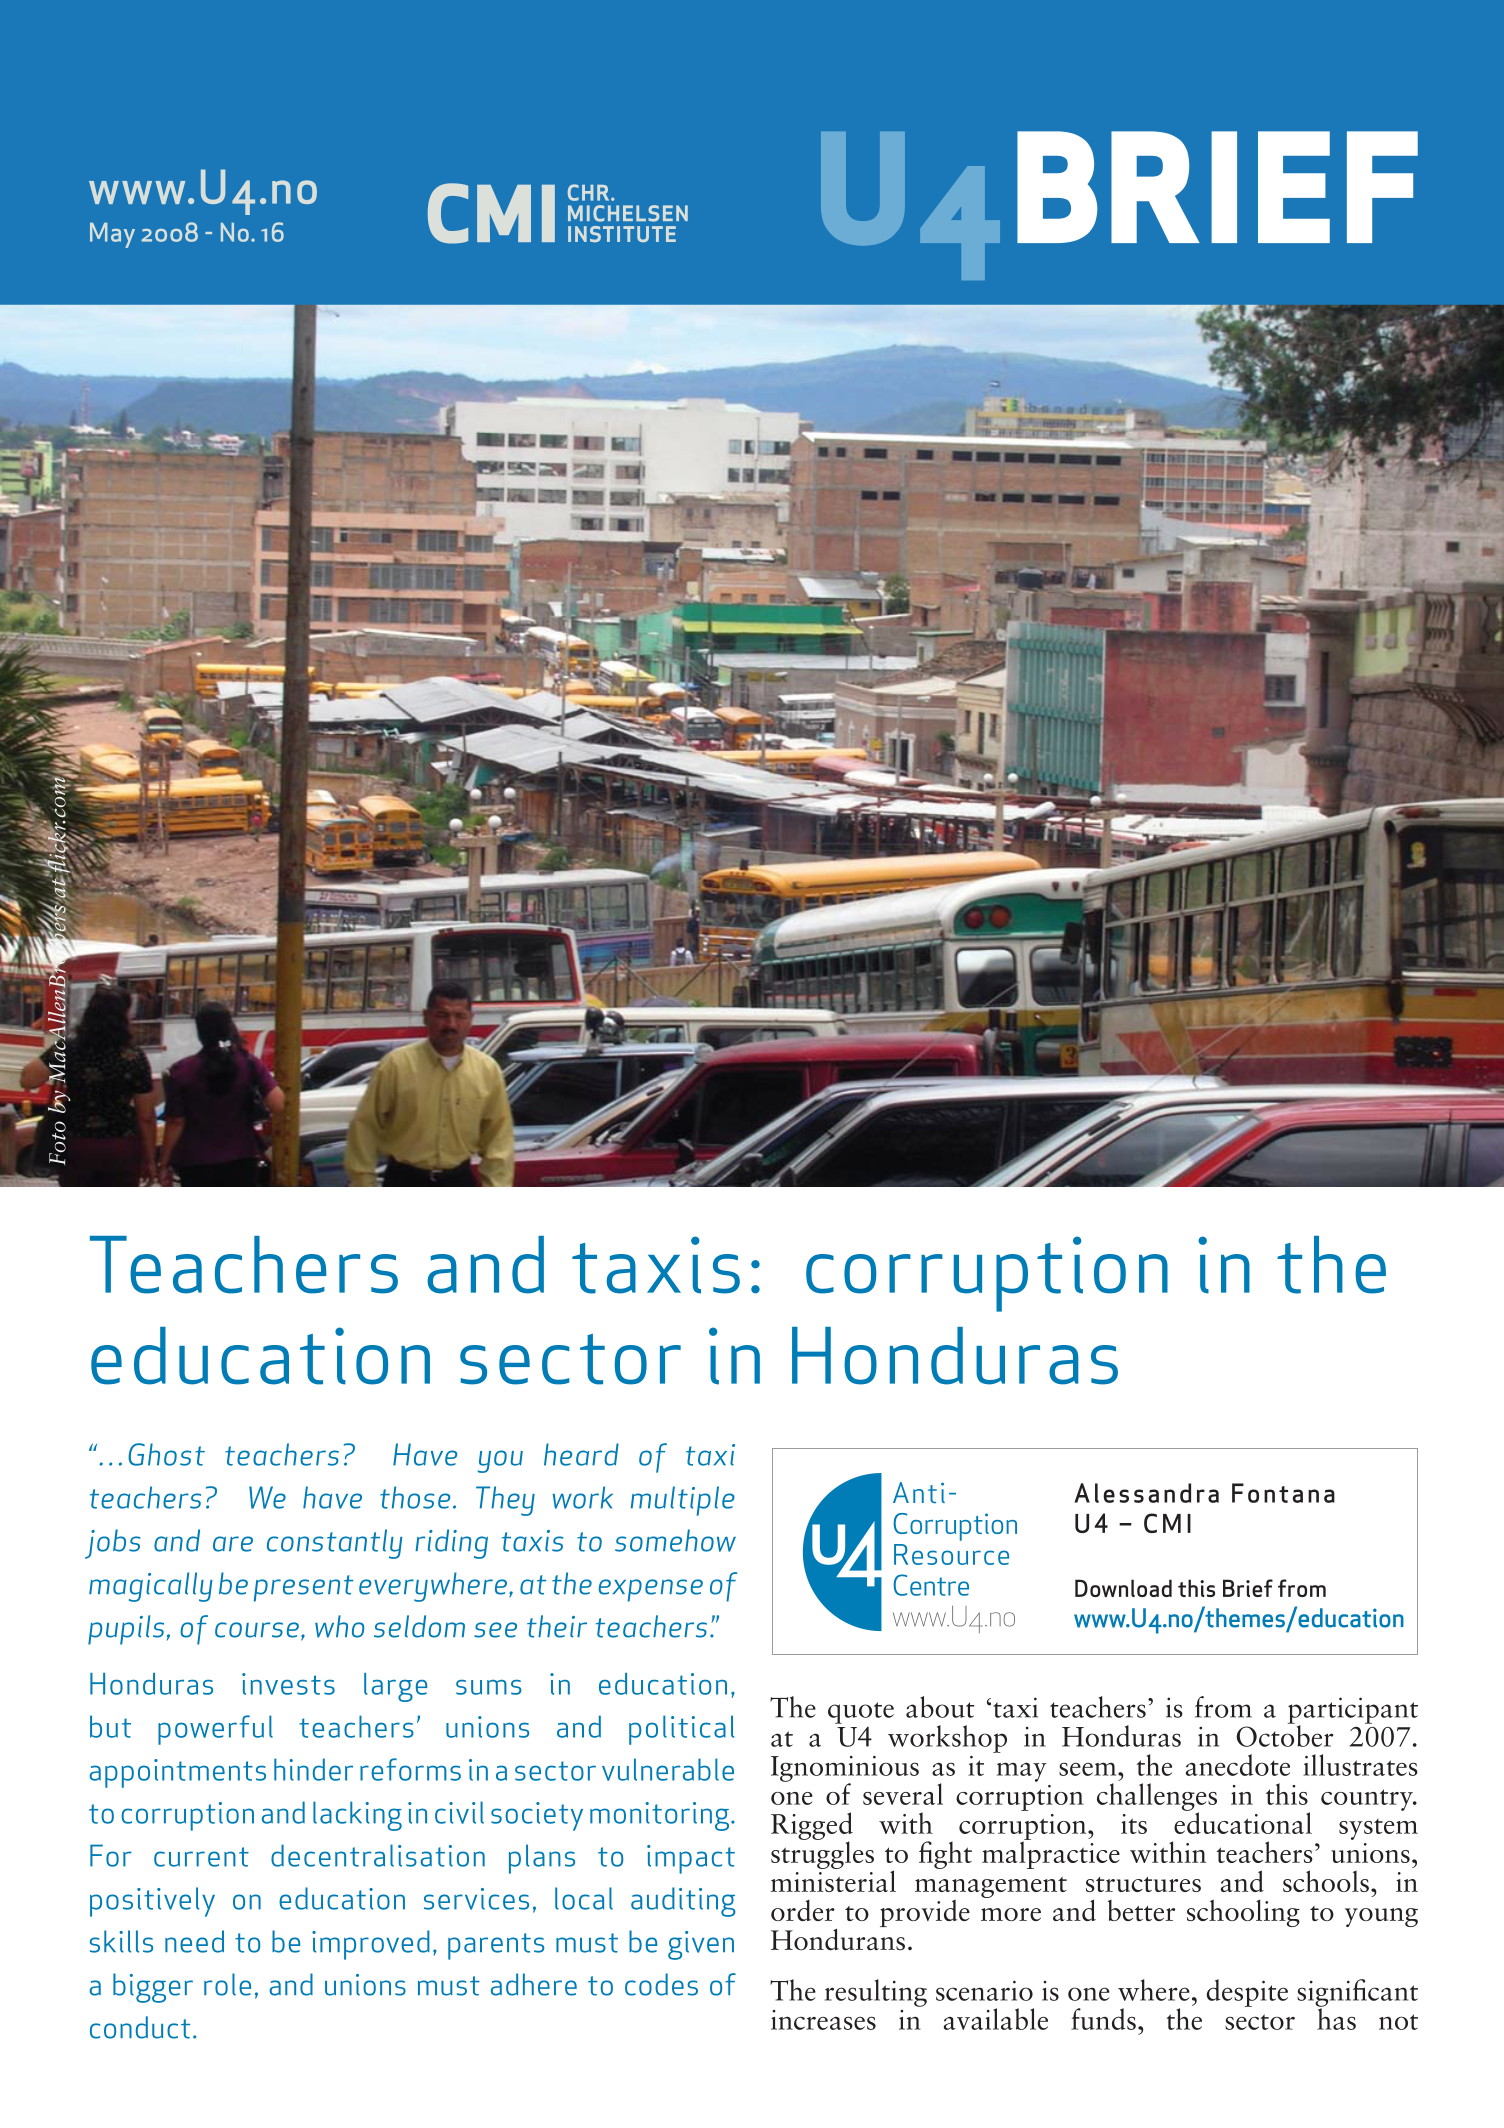 Teachers and Taxis: Corruption in the education sector in Honduras